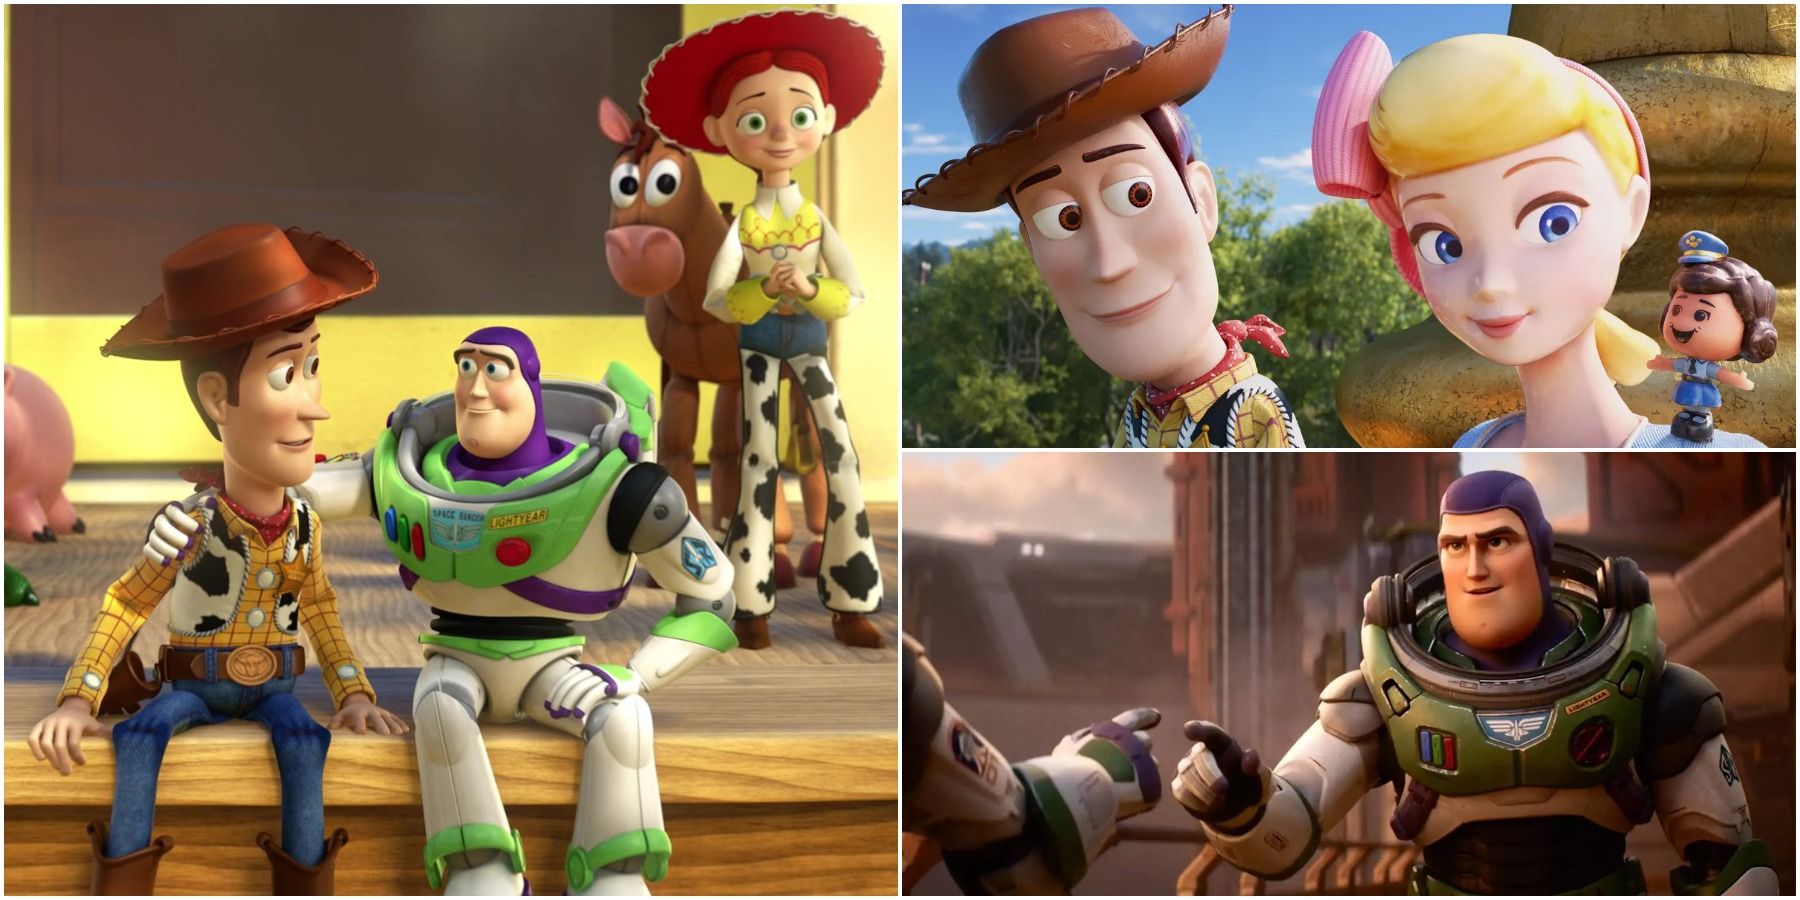 Toy Story 3, Toy Story 4, and Lightyear